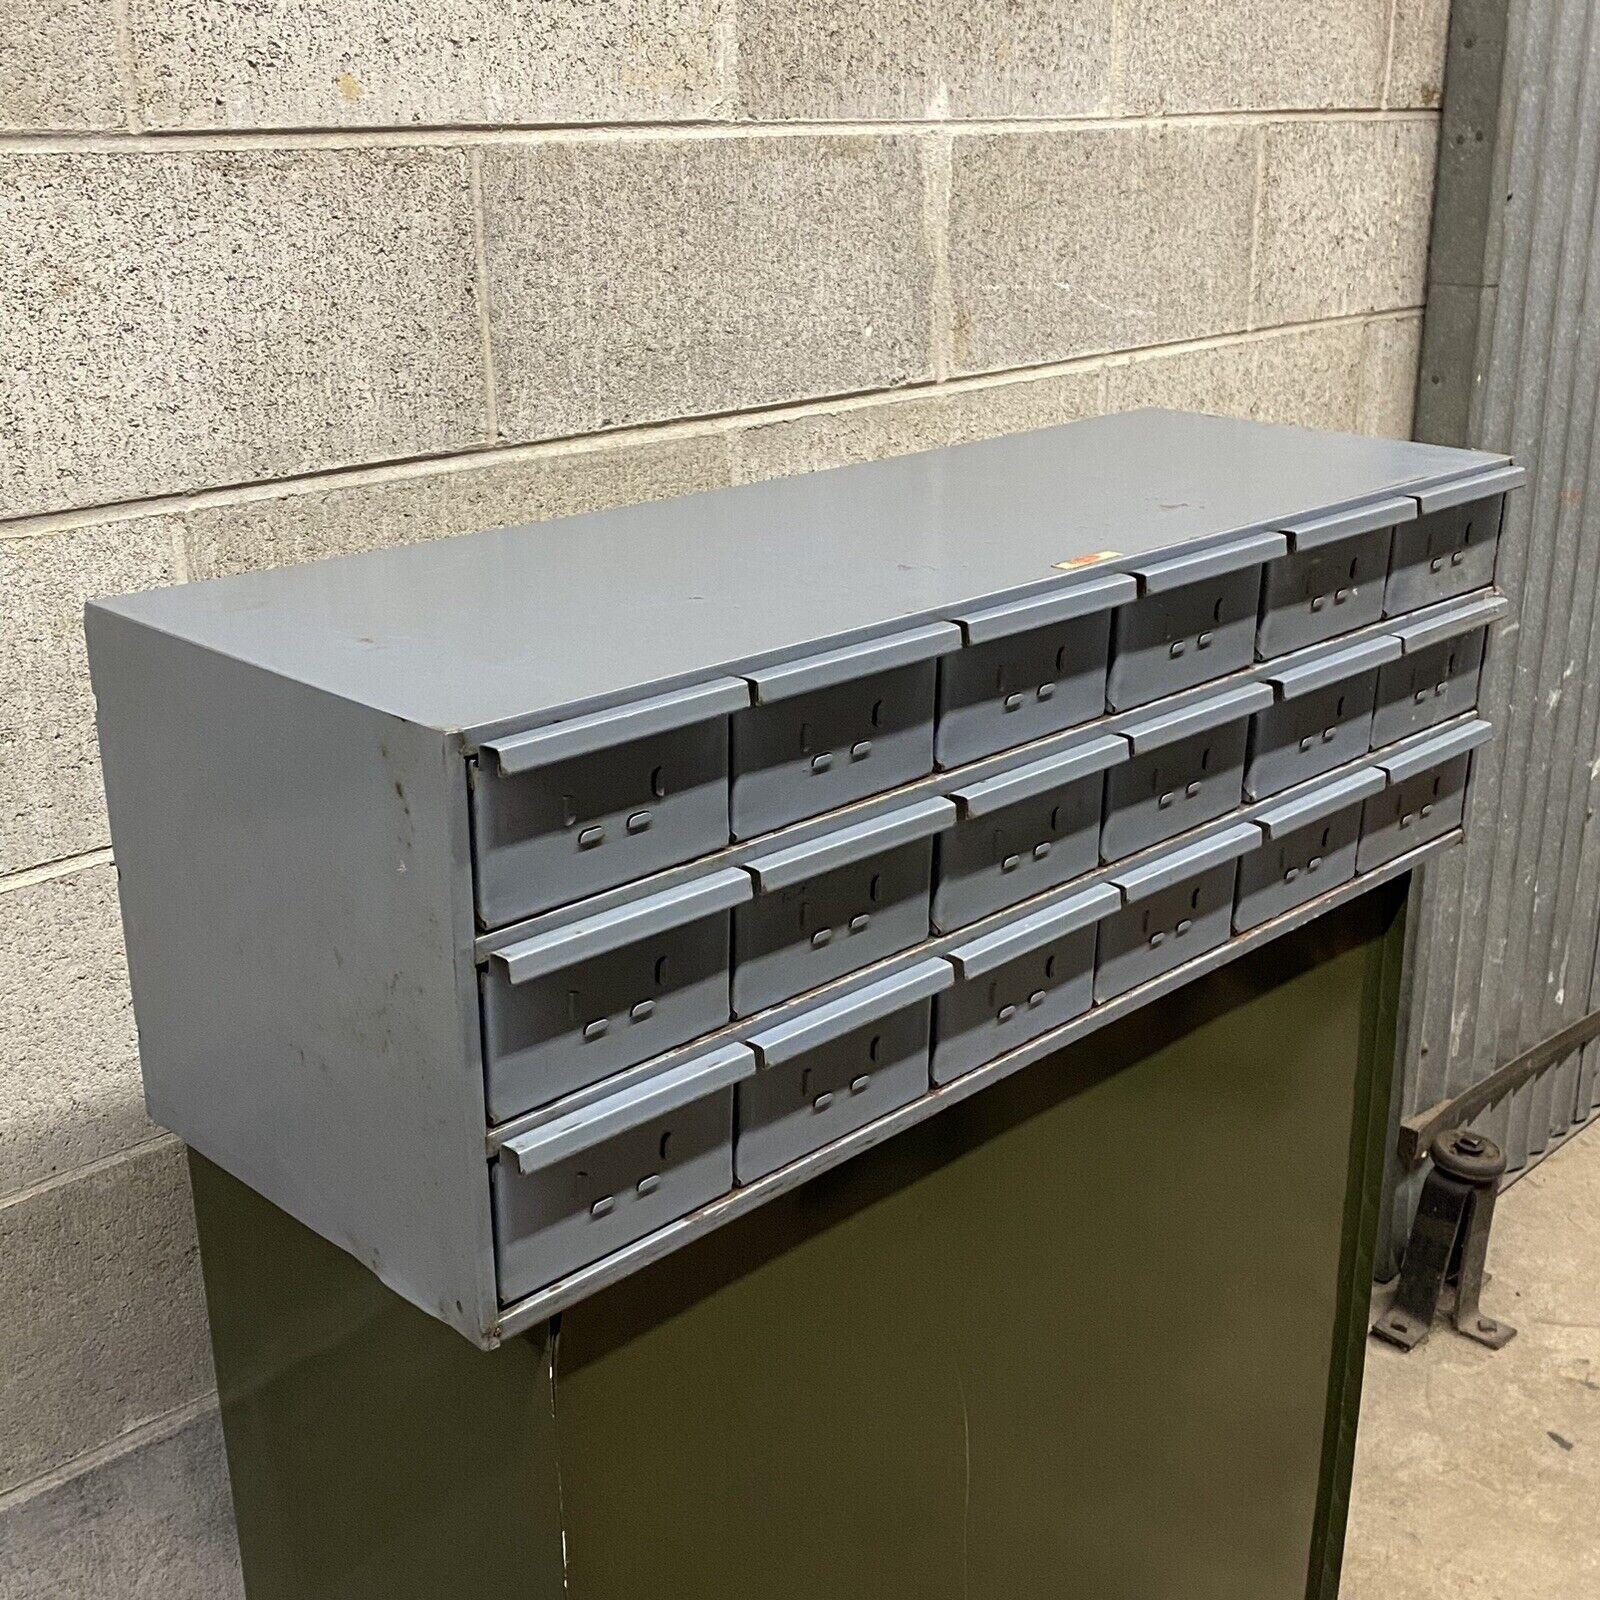 Vintage 18 Drawer Steel Metal Industrial Storage Tool Small Parts Cabinet. Circa Late 20th Century. Measurements: 11